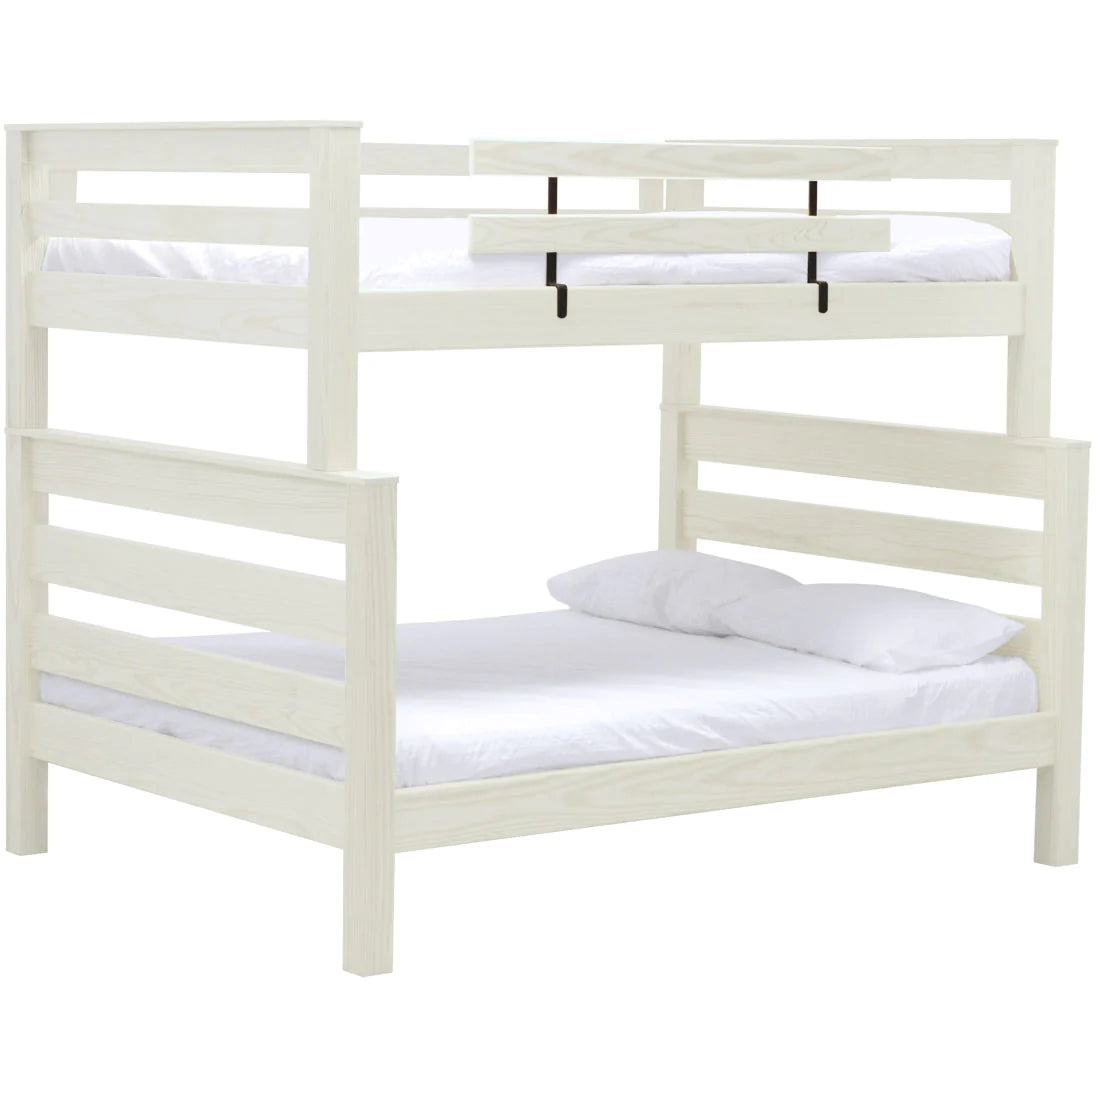 TimberFrame Bunk Bed Twin XL over Queen